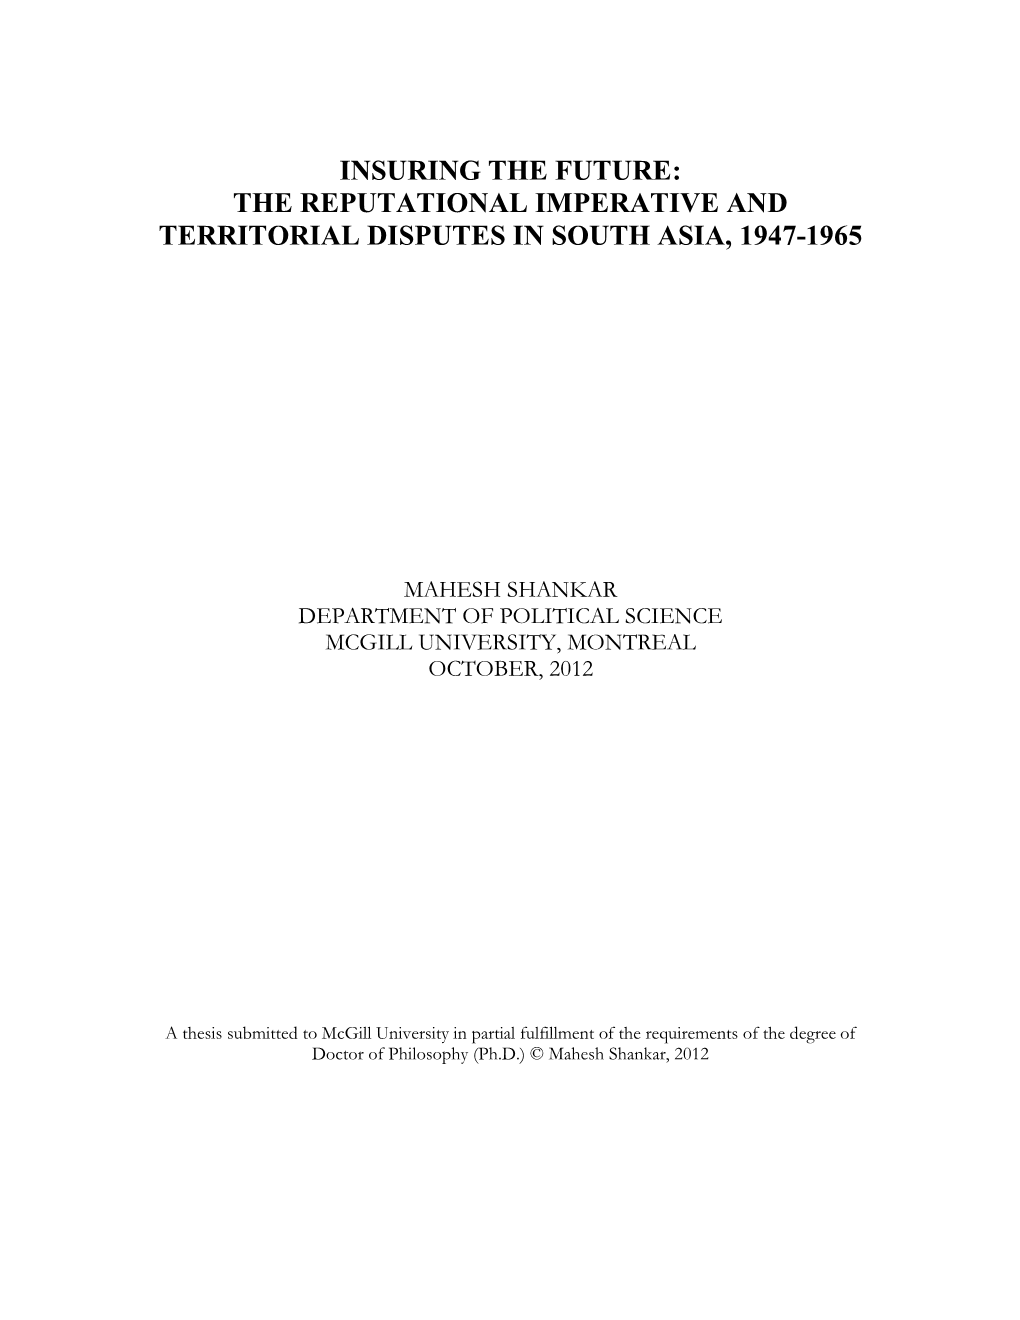 The Reputational Imperative and Territorial Disputes in South Asia, 1947-1965